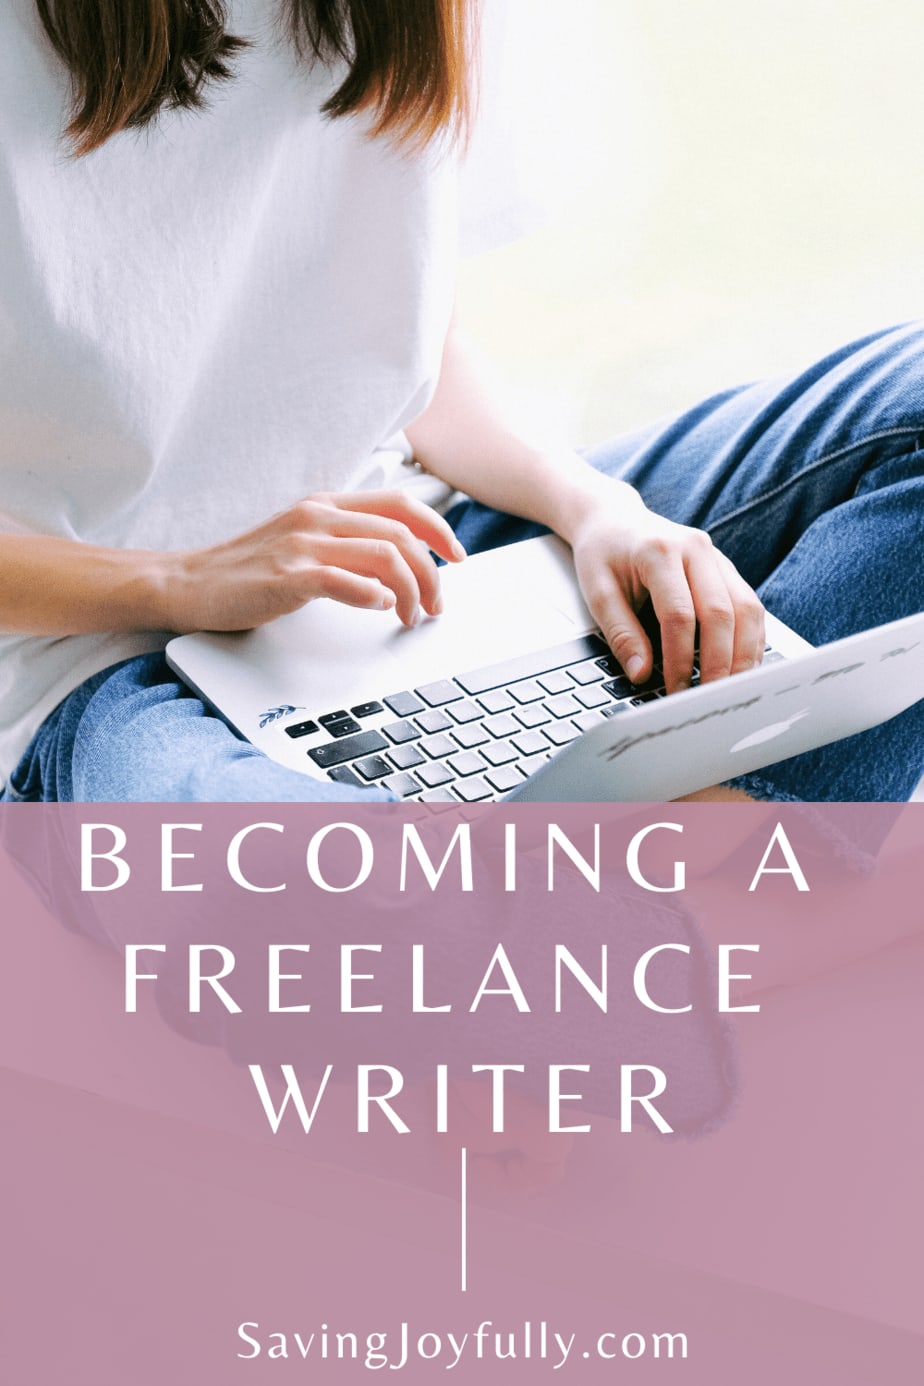 HOW TO BECOME A SUCCESSFUL FREELANCE WRITER